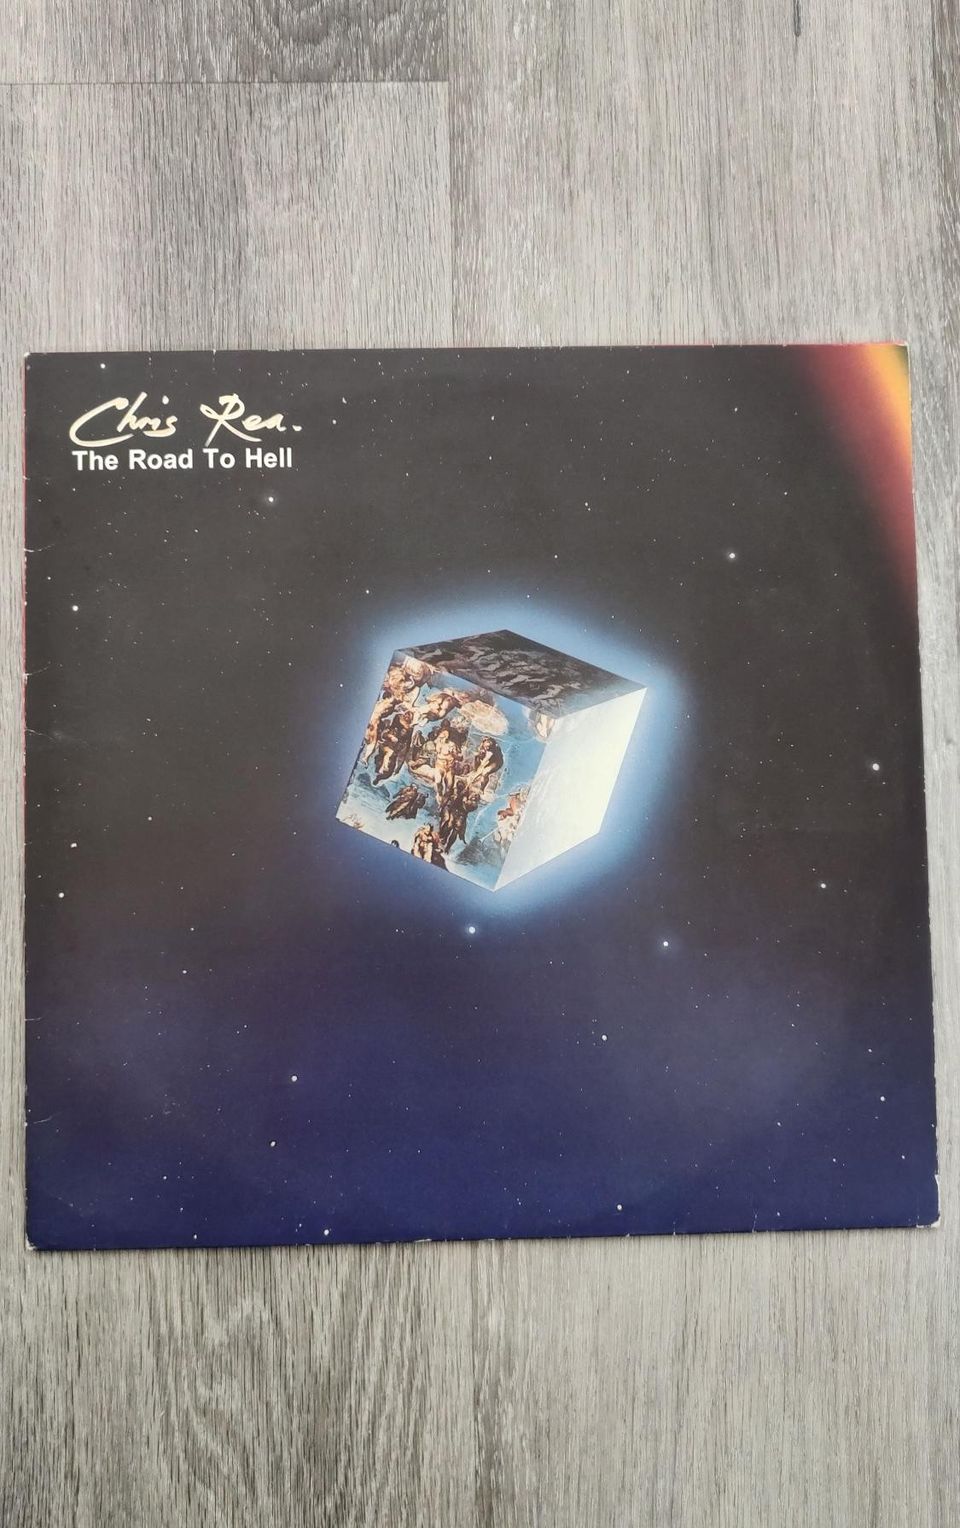 Chris Rea The Road To Hell LP levy